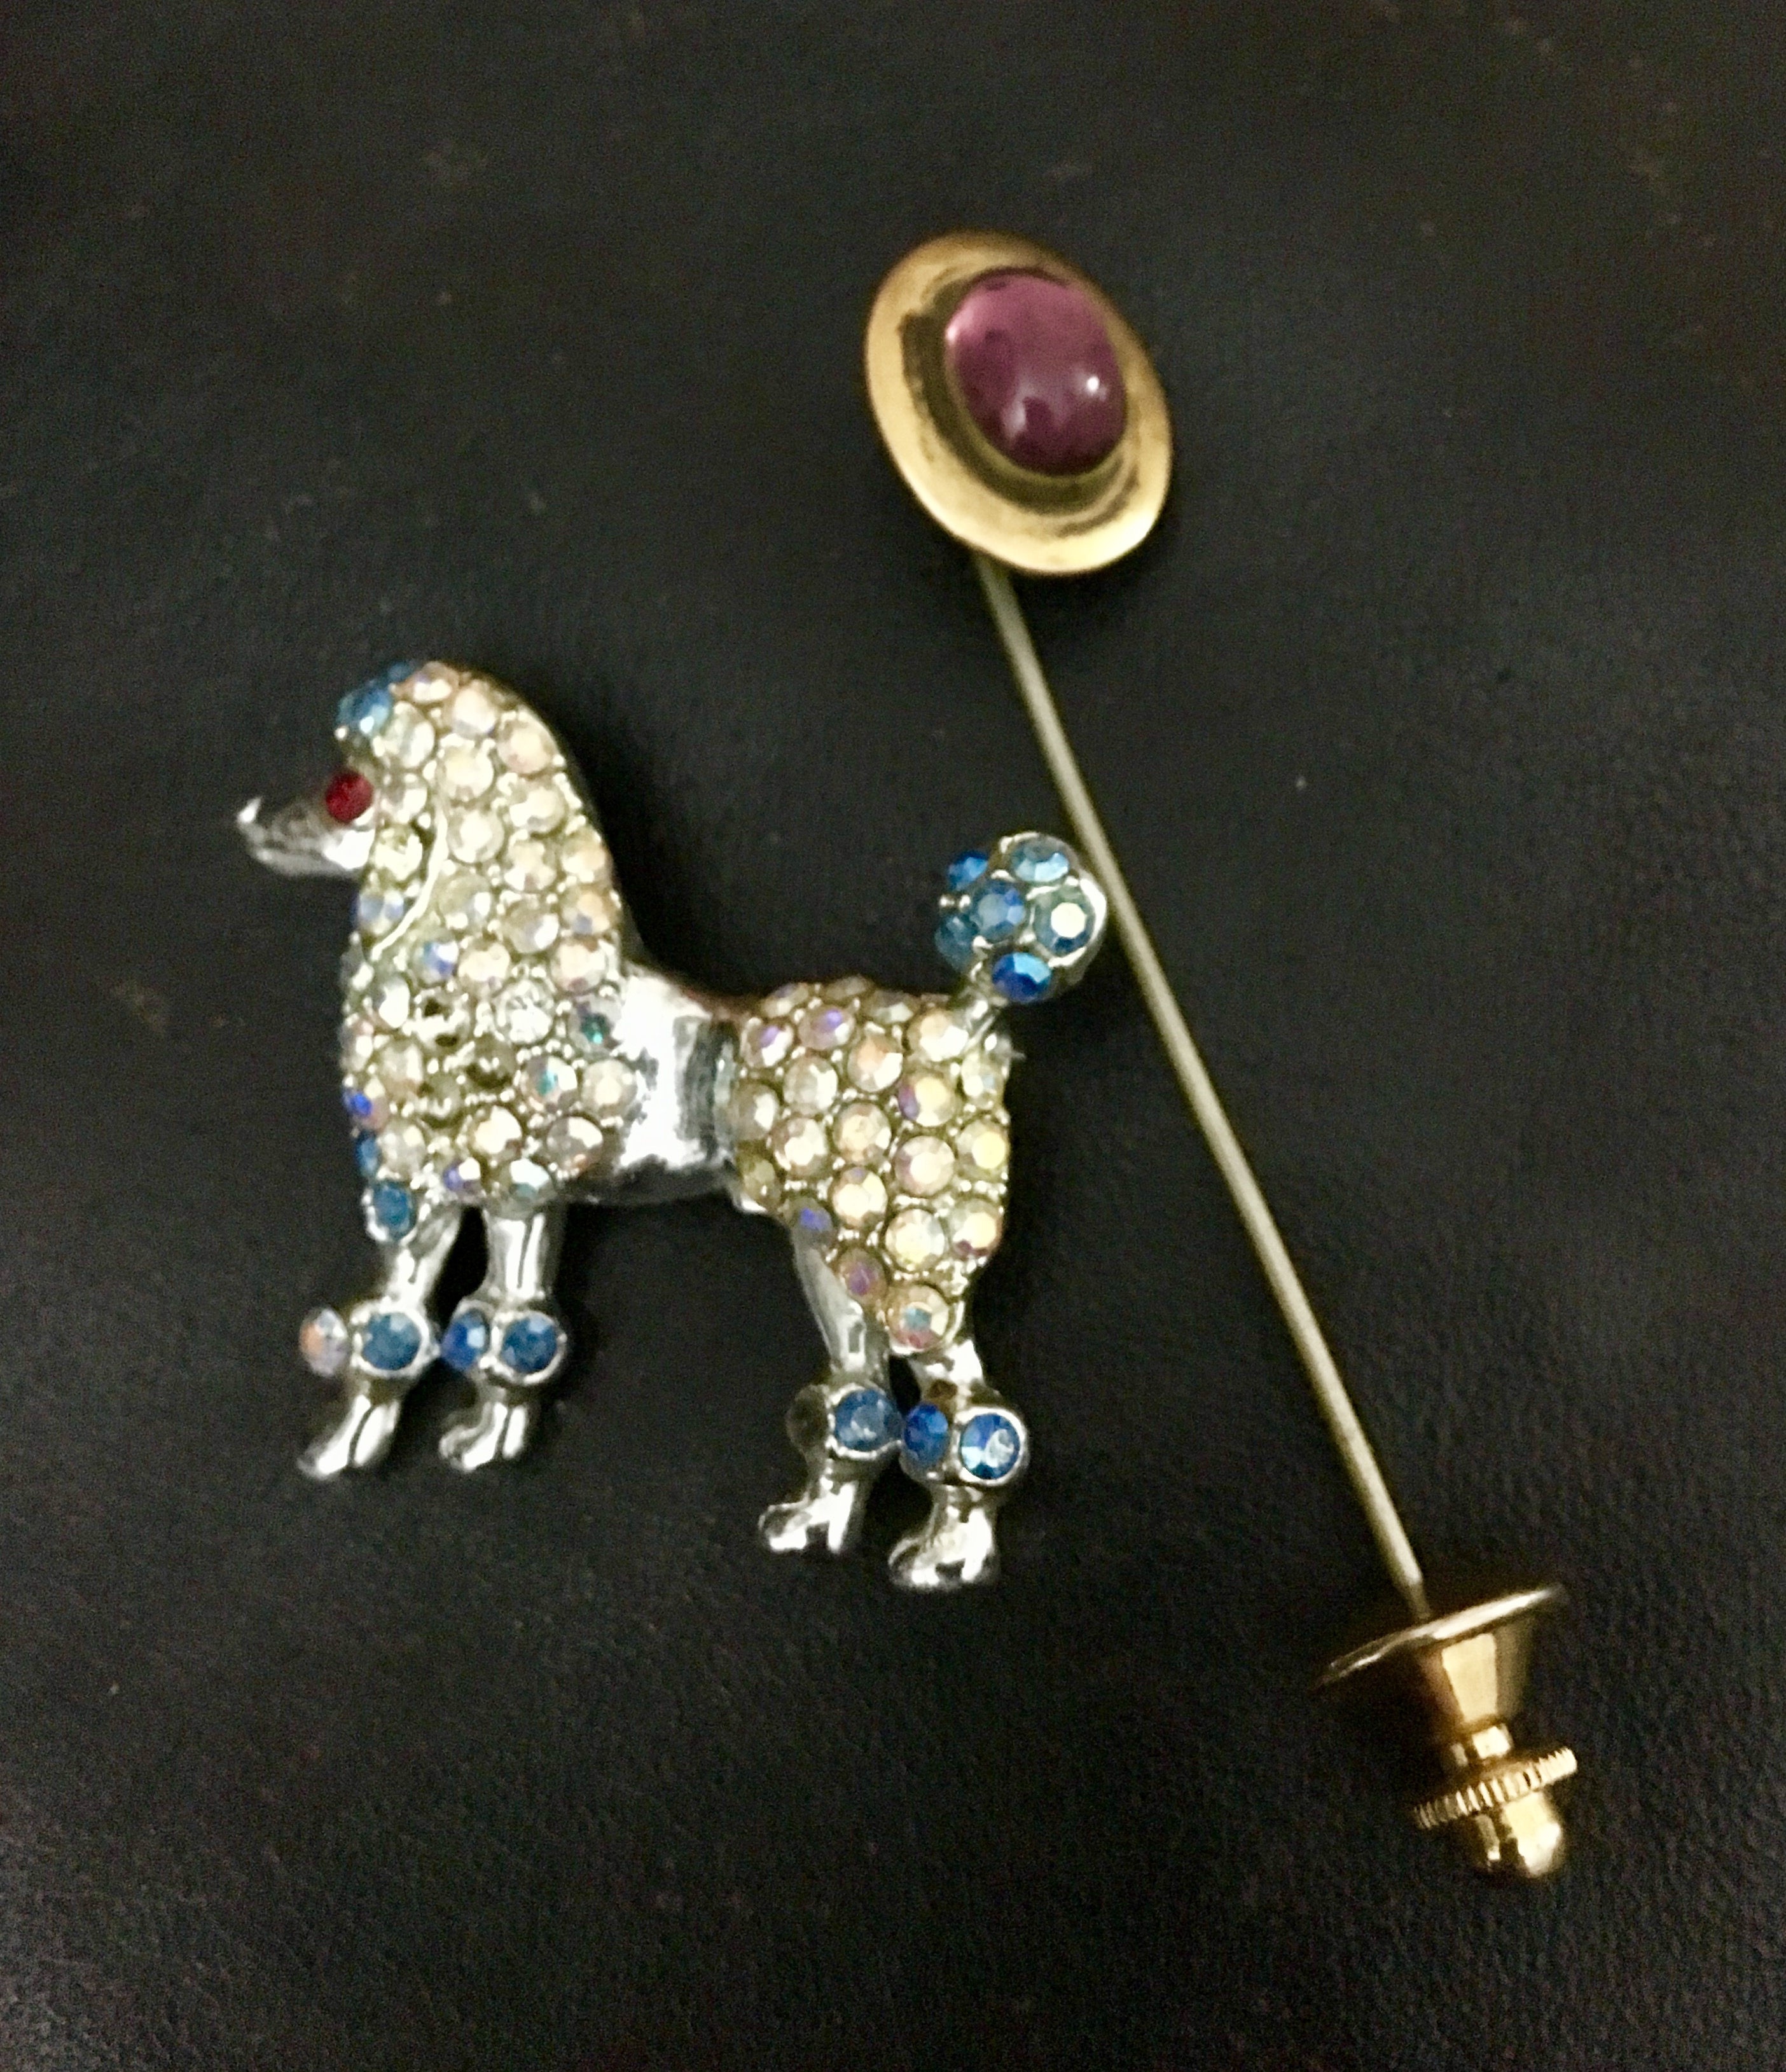 Brimfield poodle pin and hatpin.jpg